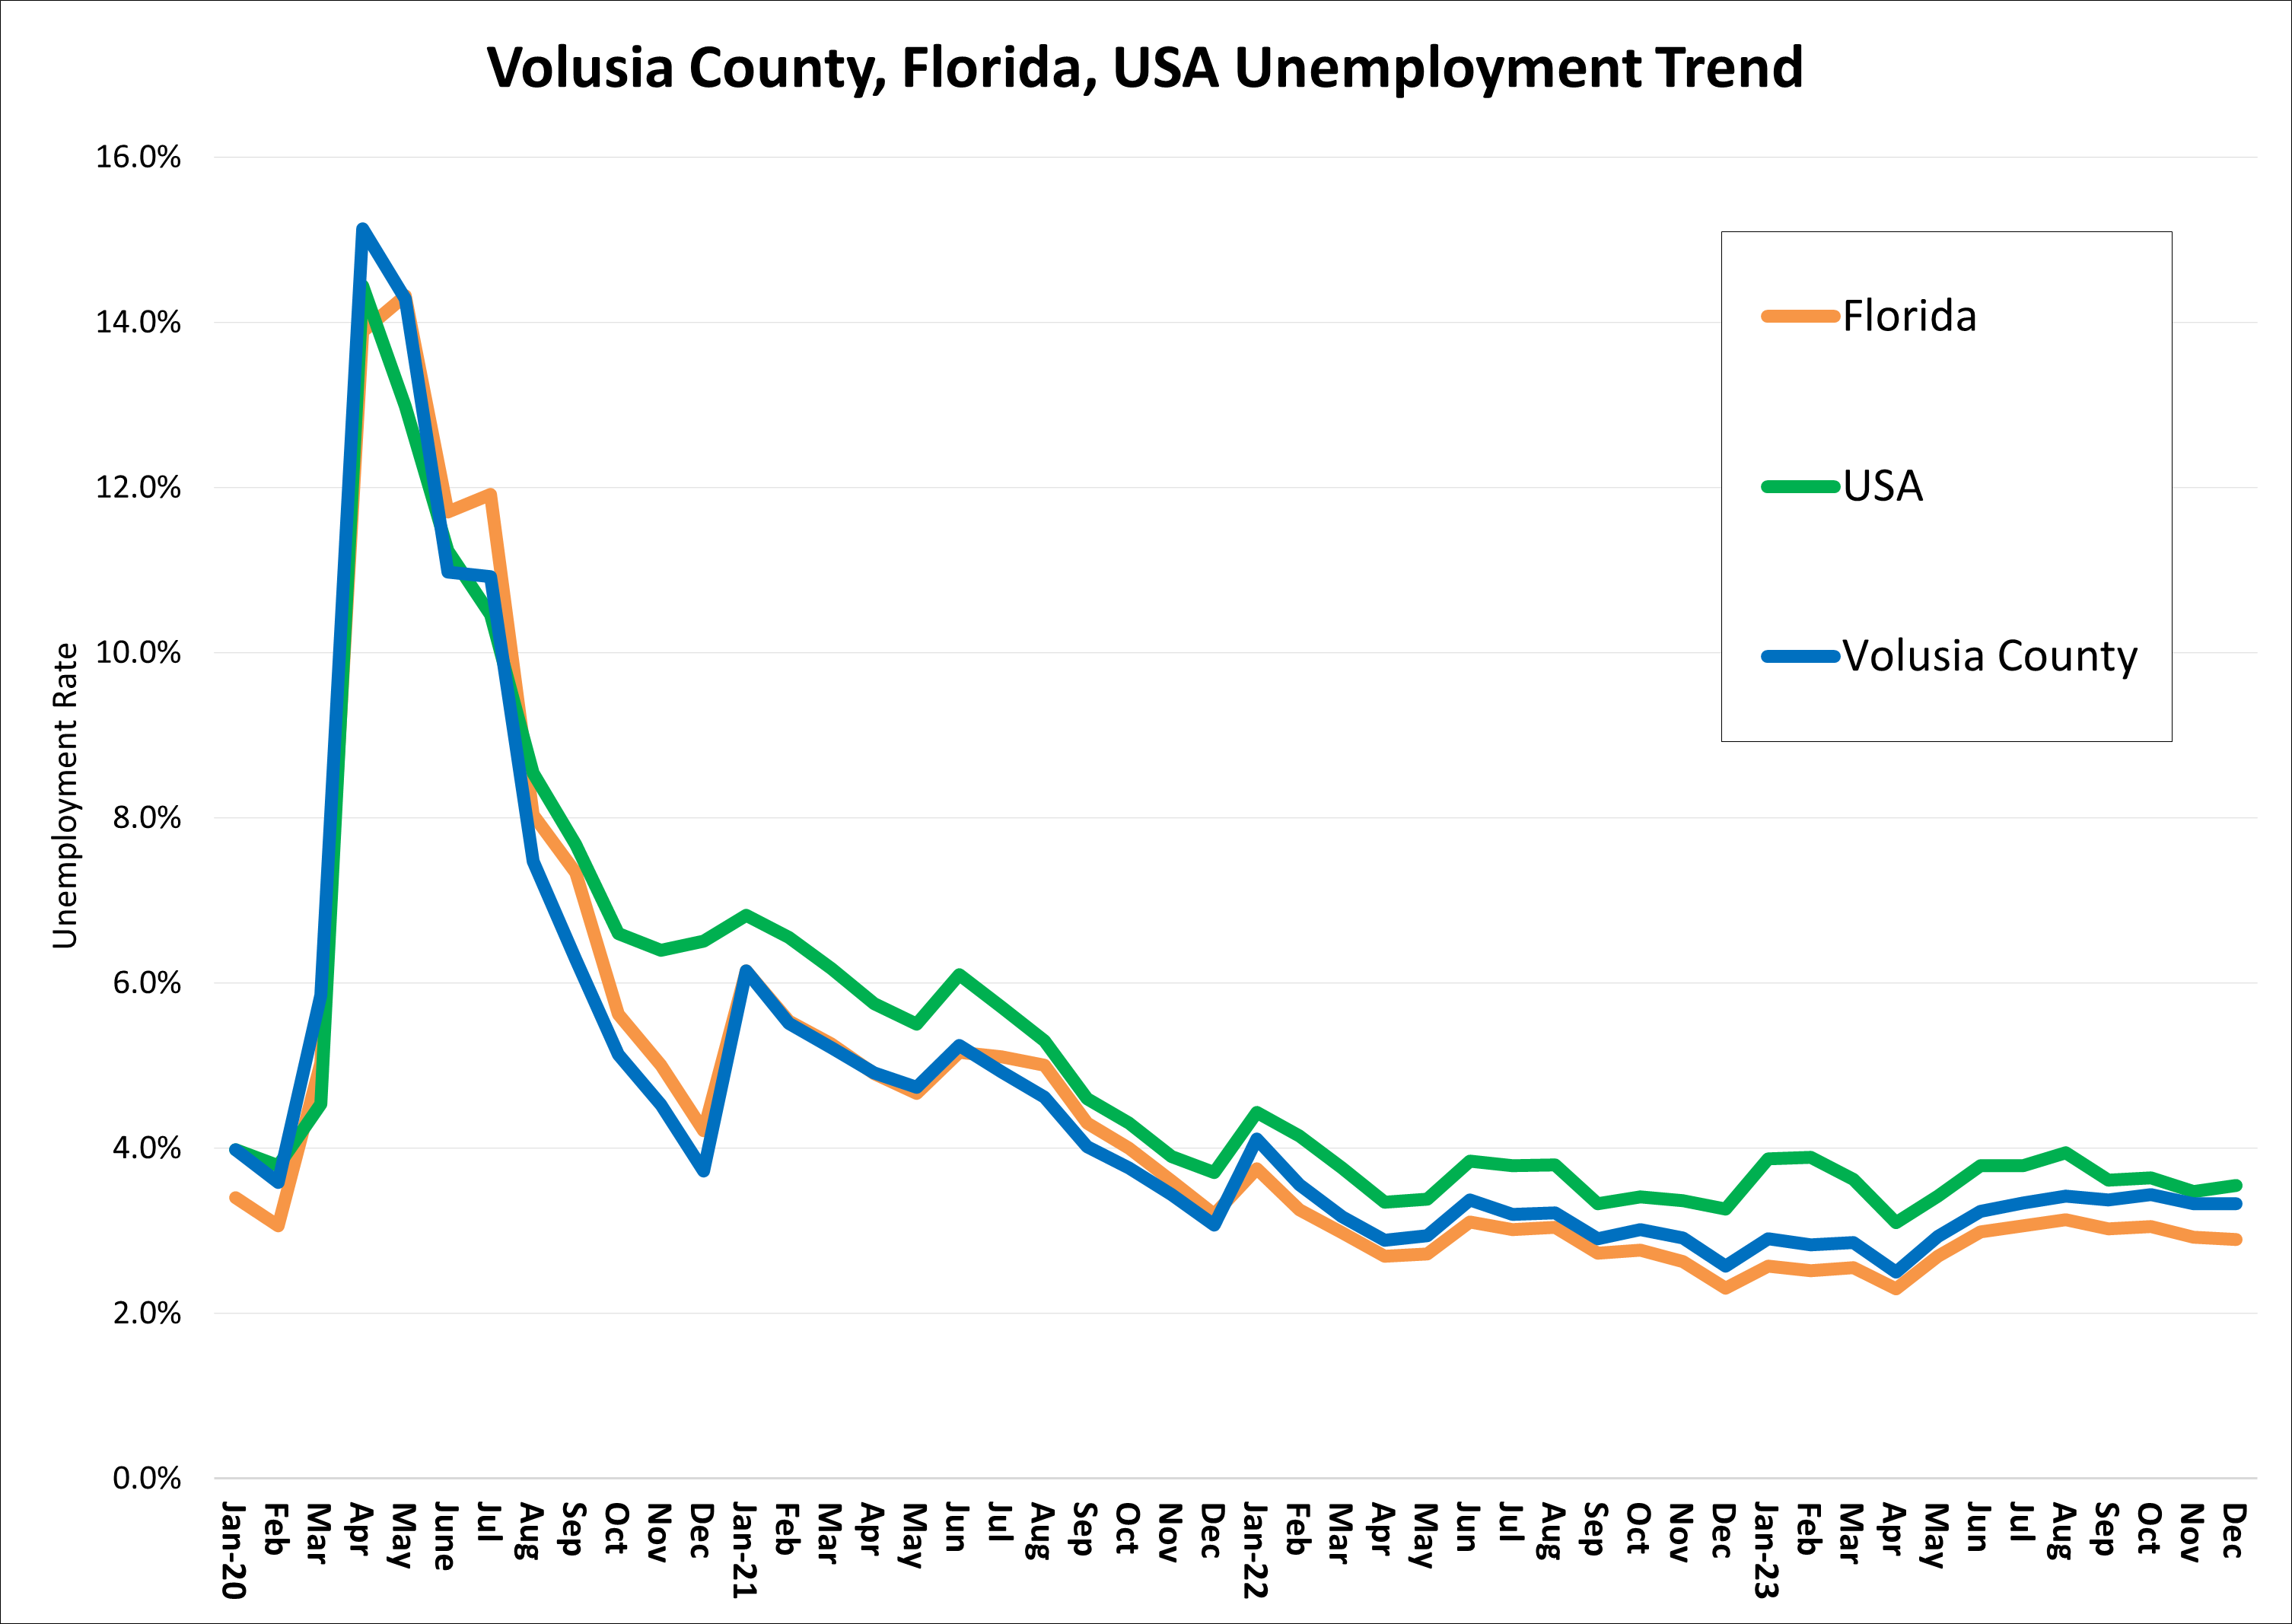 The chart is showing the unemployment rate trend for Volusia County, Florida, and the US. After the impact of COVID and a rate of 15.1%, Volusia County's unemployment rate has steadily decreased and is currently at 2.5% as of April 2023. Florida's unemployment rate is 2.3% and the US is 3.1%. 